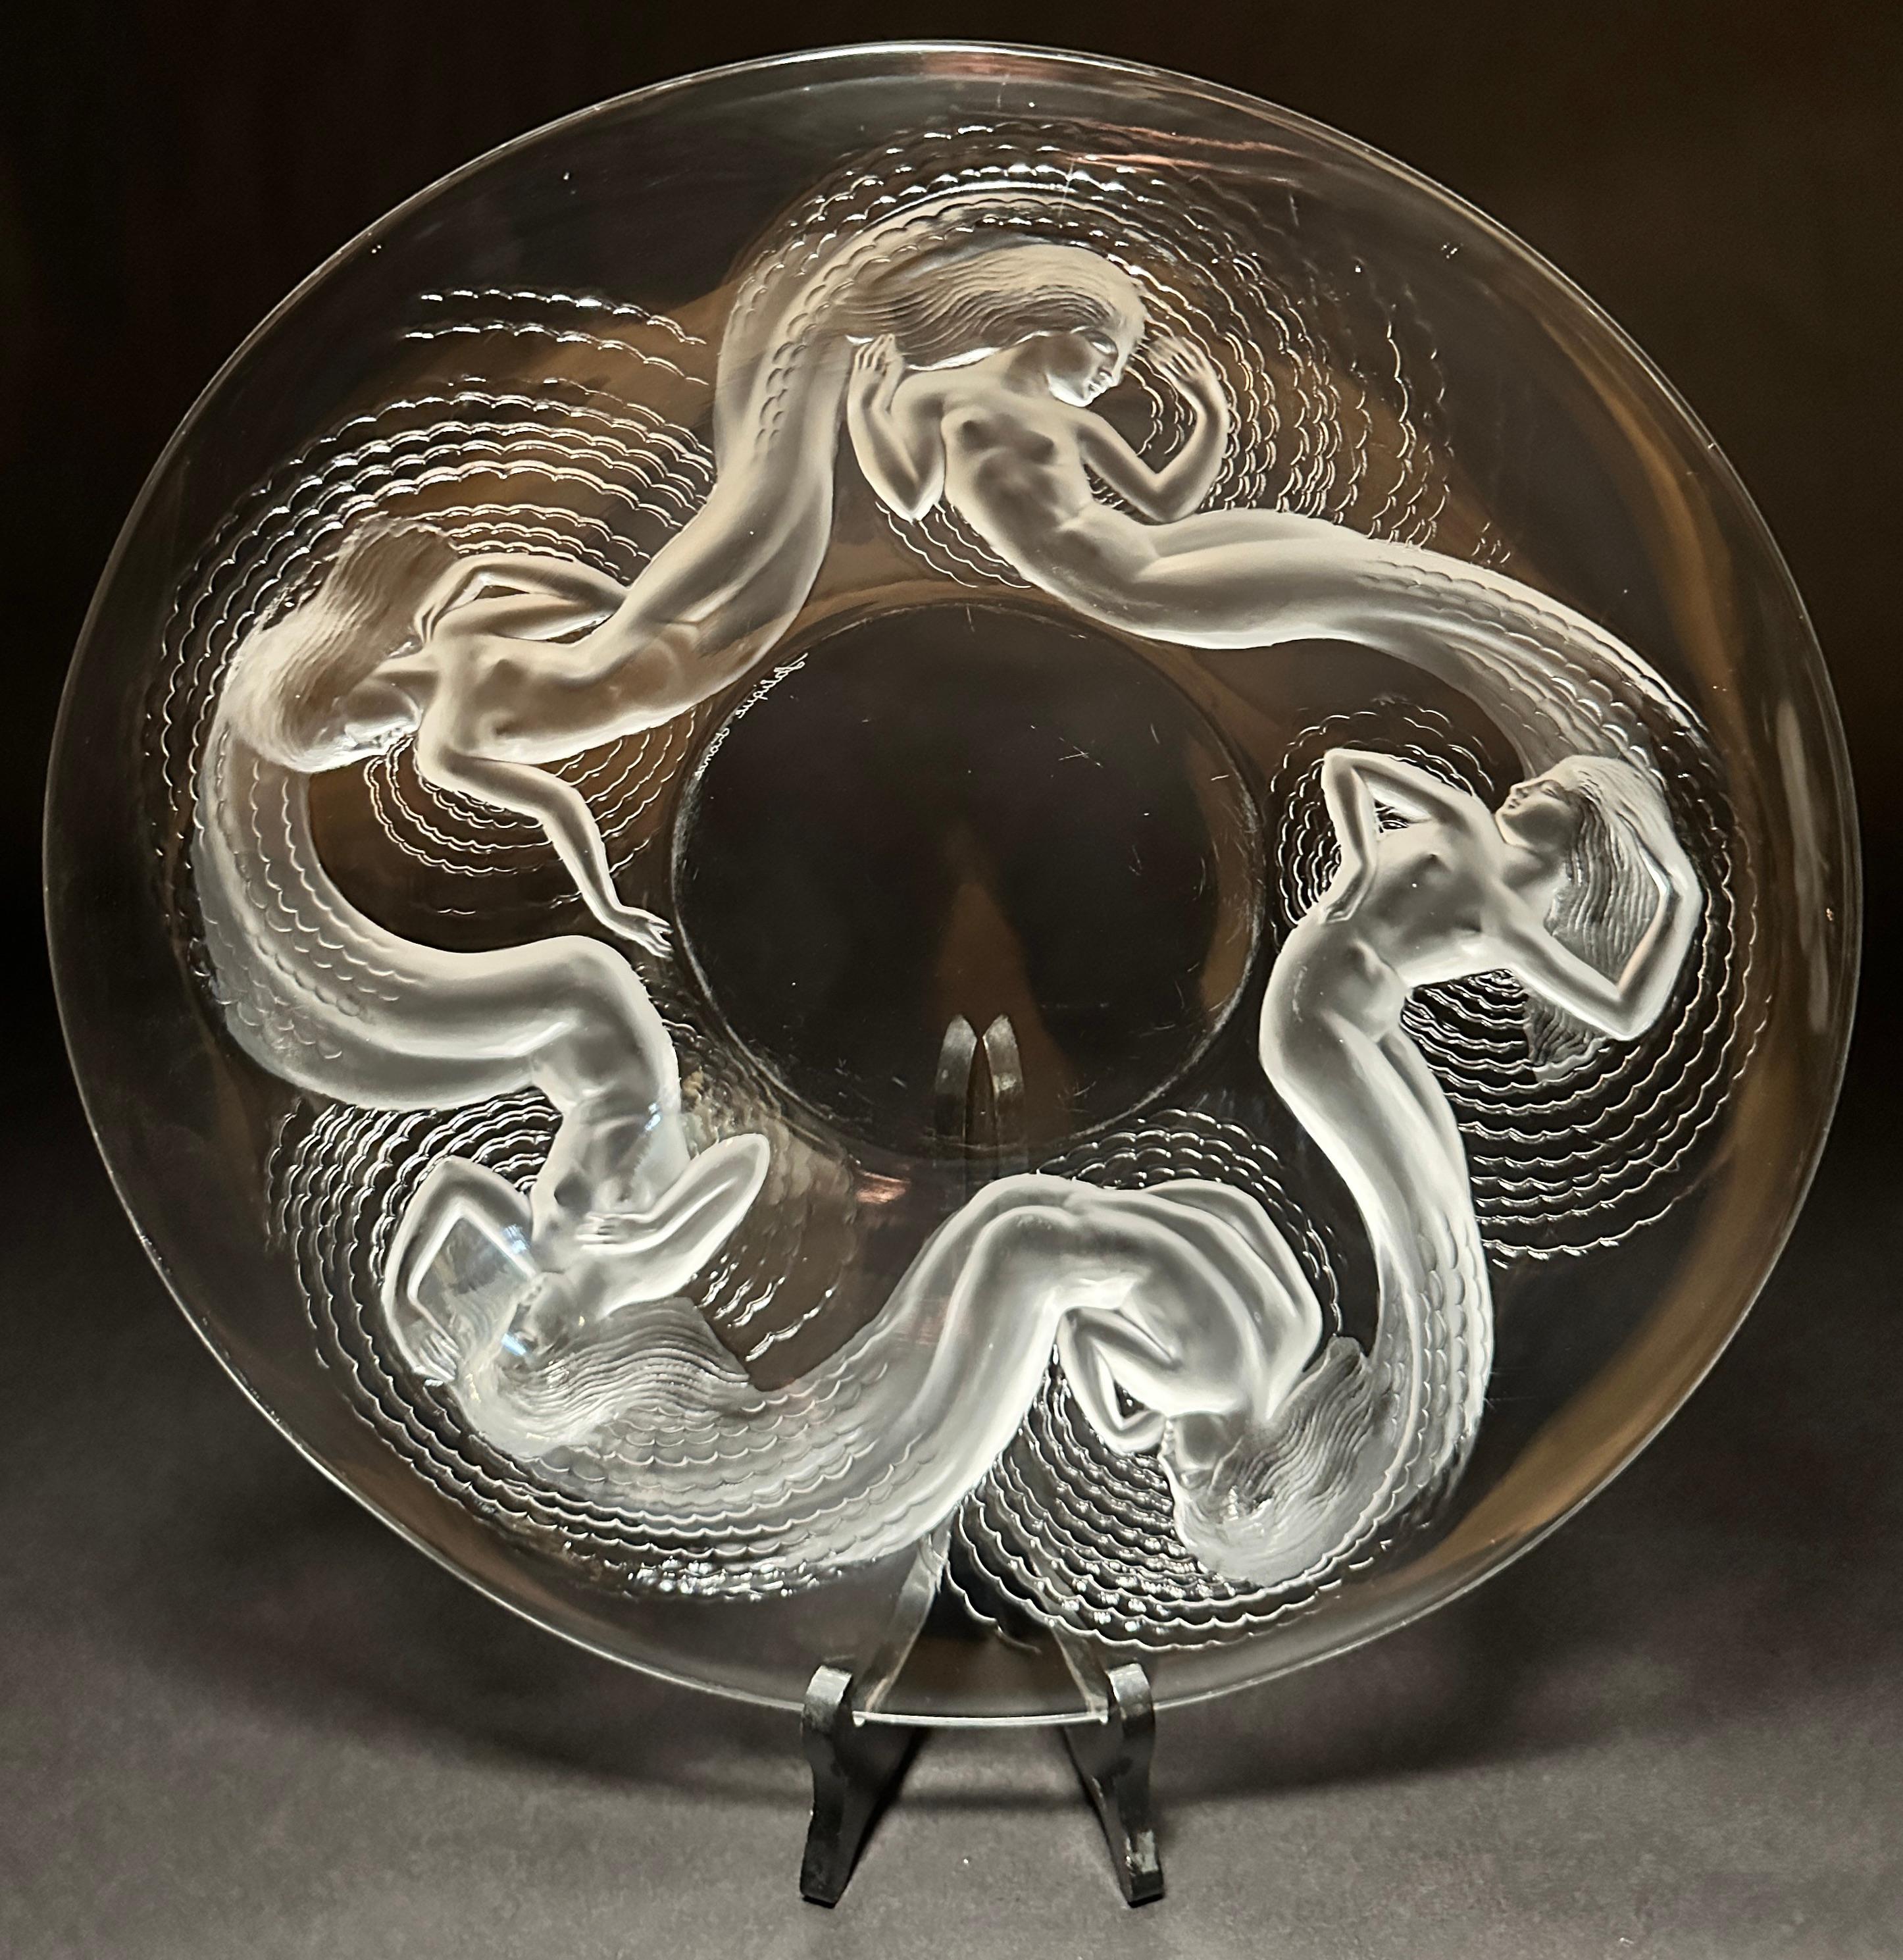 Lalique clear and frosted shallow bowl or charger in 'Calypso' design. Signed 'Lalique France' on bottom. It features frosted opalescent relief nudes, nymphs or mermaids. 
Stand not included.